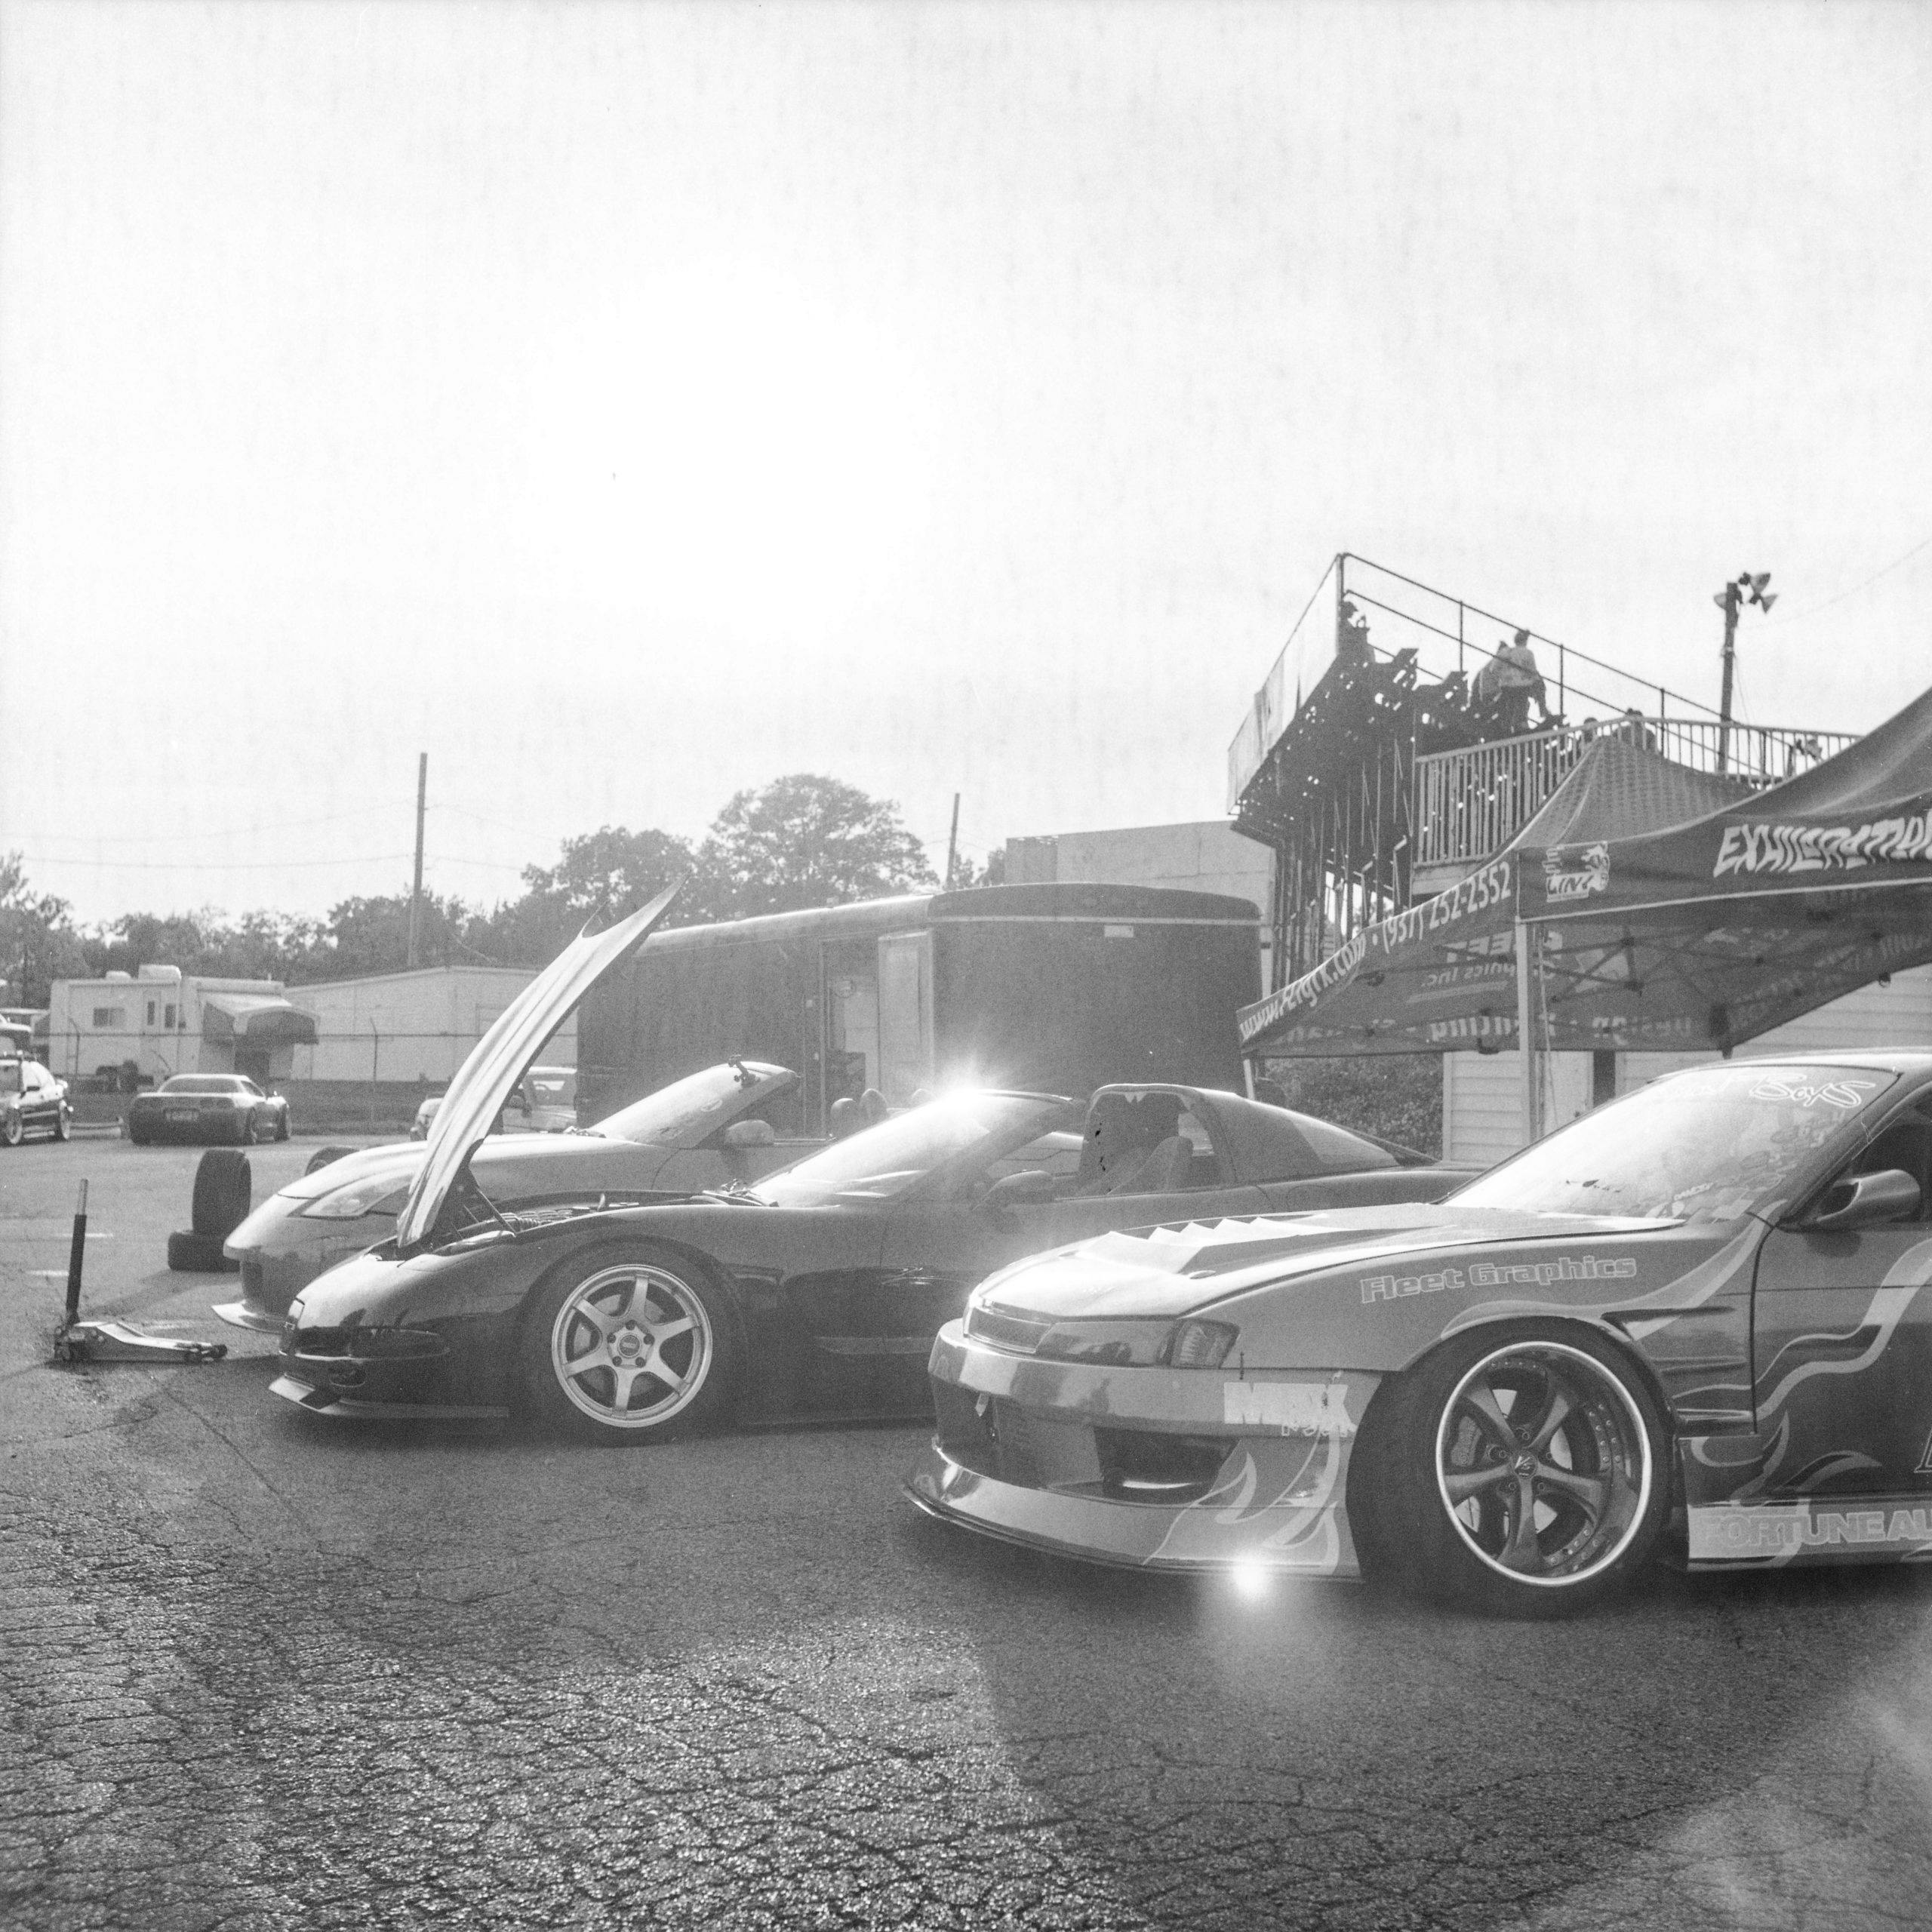 Motorsports track day film photography tips black white vertical